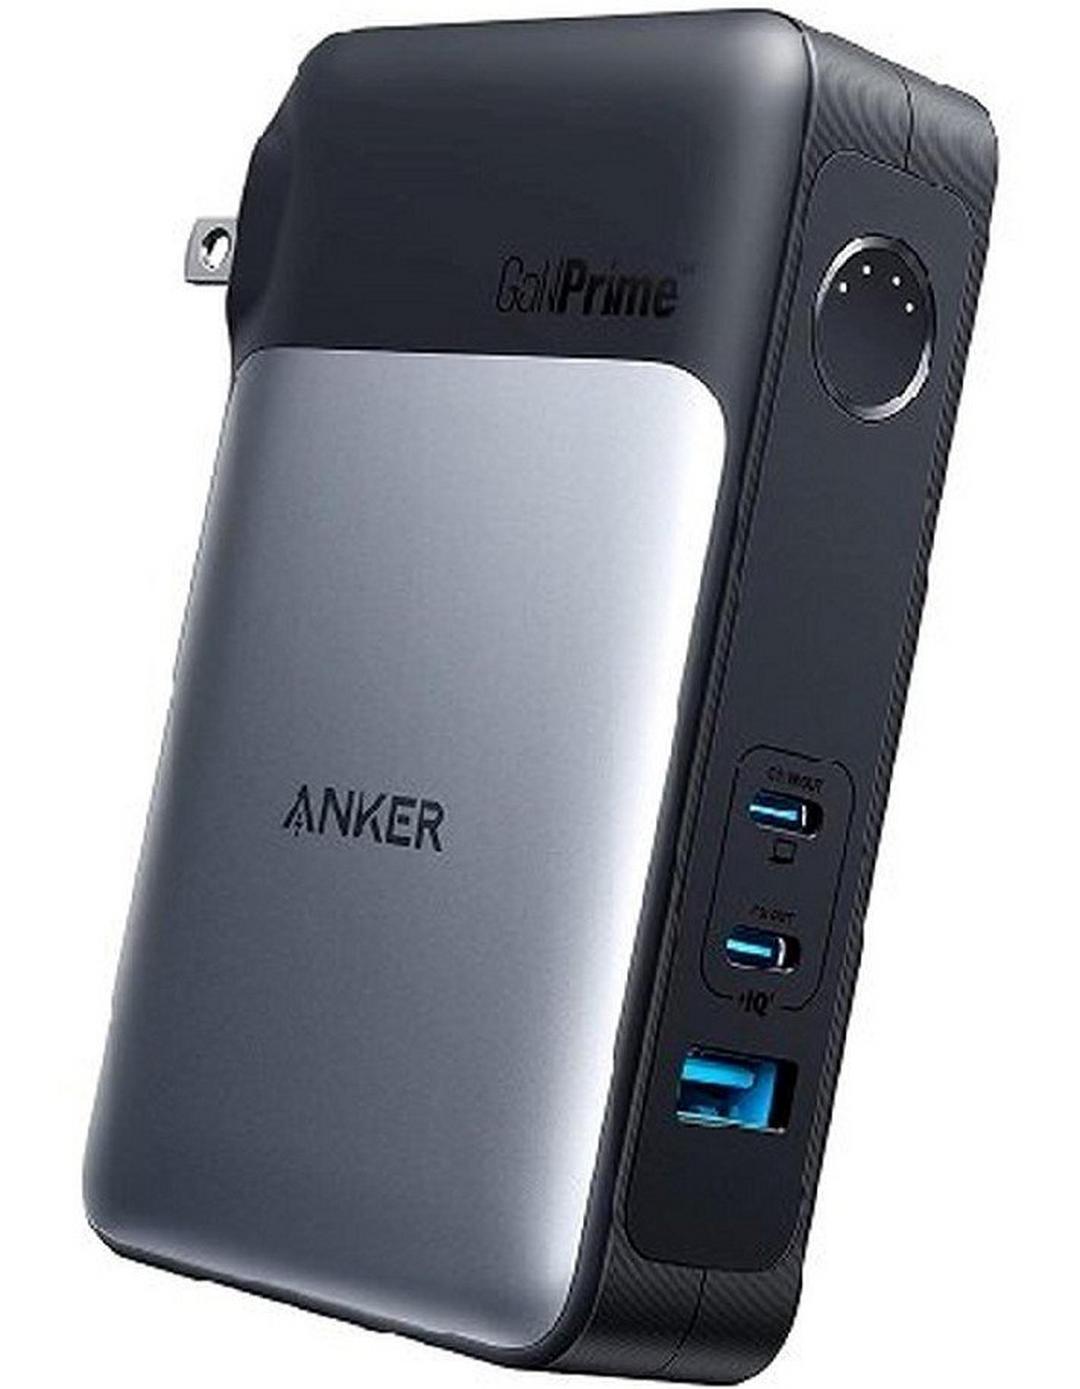 Anker 733 2-in-1 Power Bank and Hybrid Charger, 10000mAh, 30W USB-C Portable Charger with 65W Wall Charger, A1651211- Black